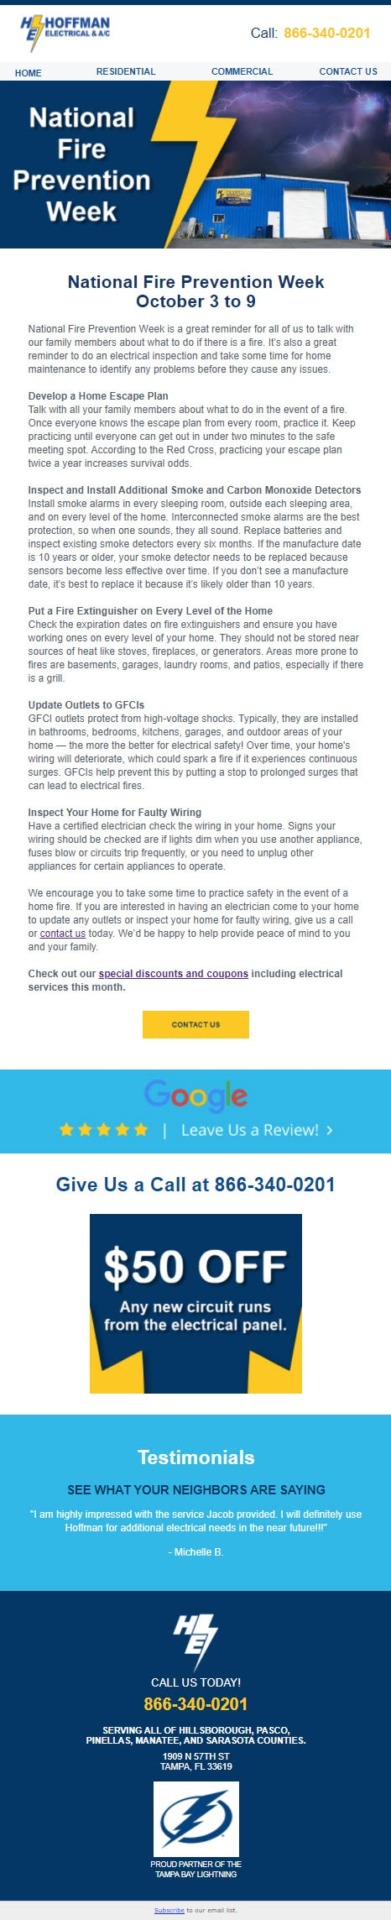 Electrician email marketing strategy